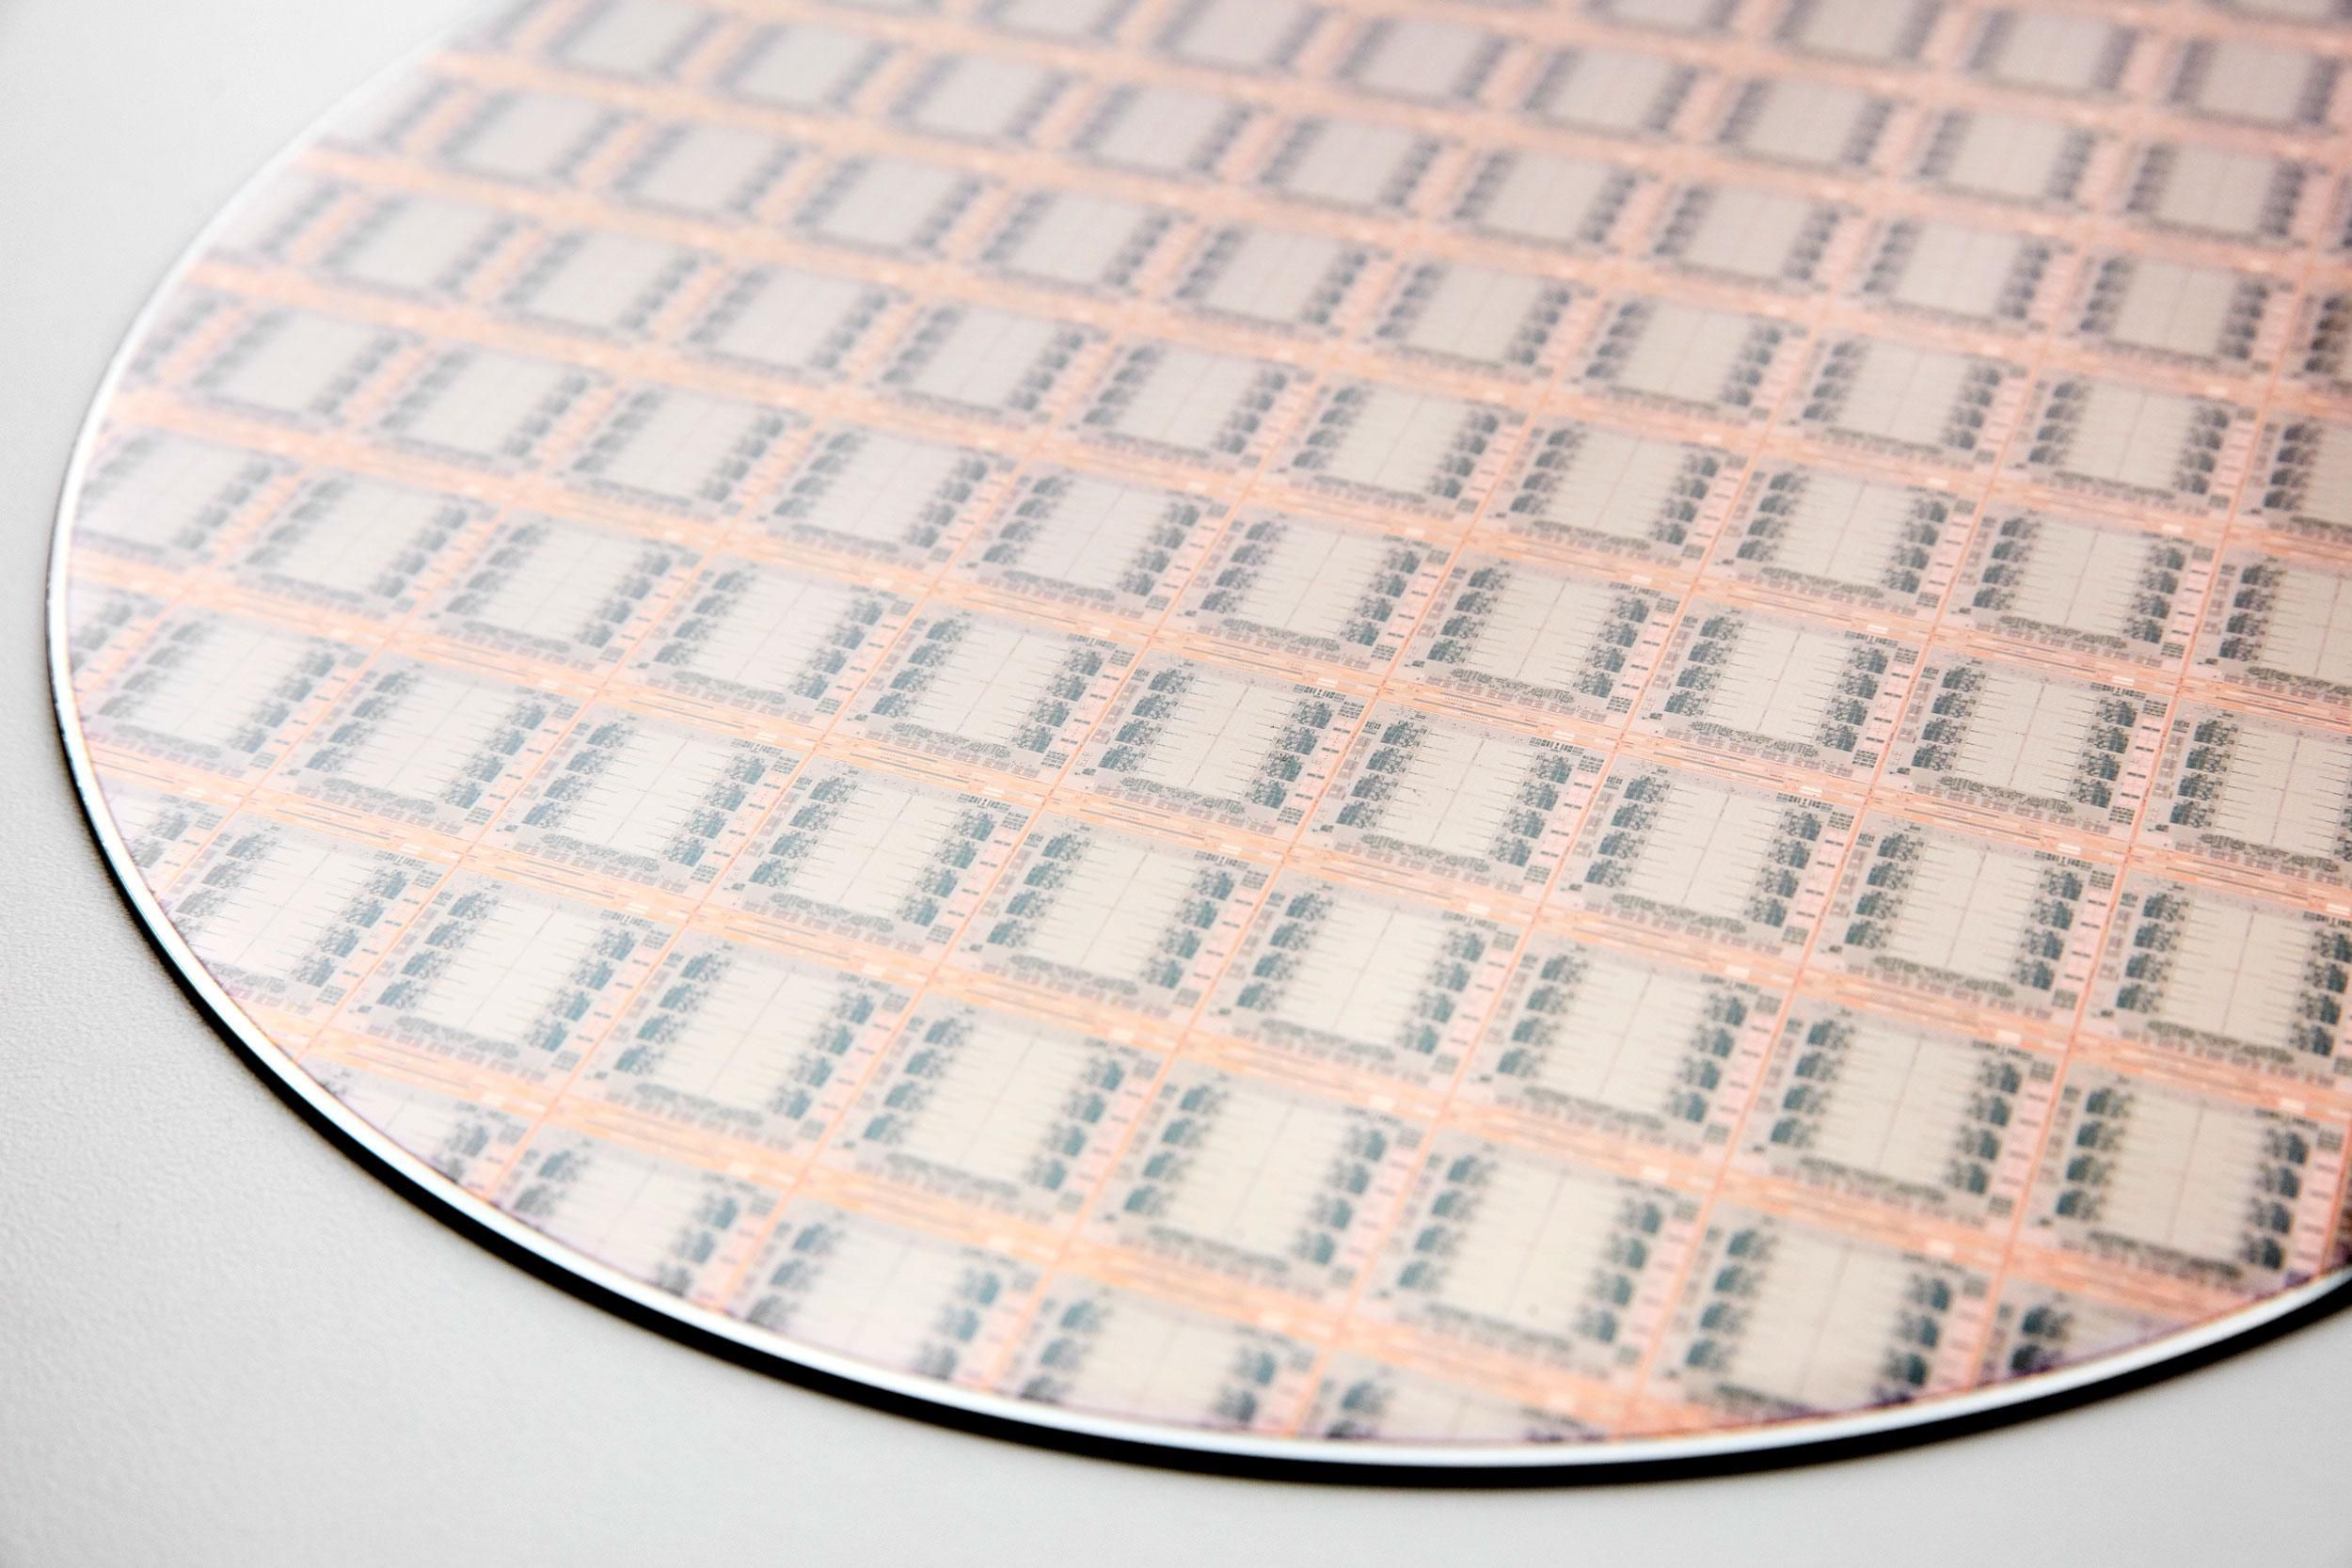 A wafer of eight-core processors—IBM’s Telum chip